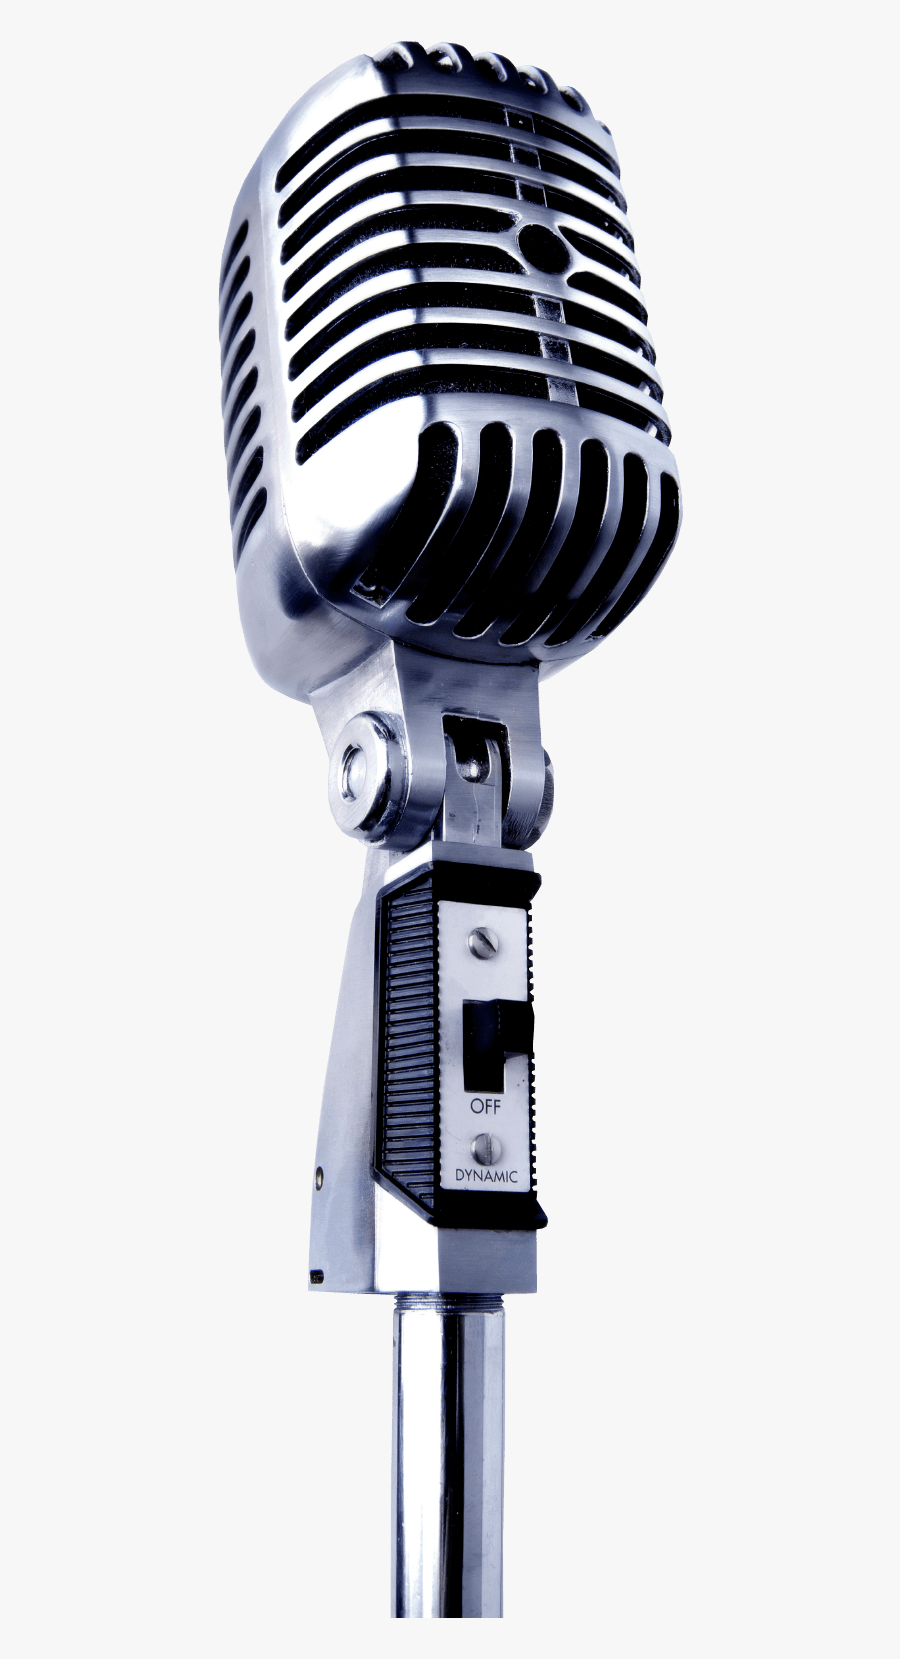 Thumb Image - Microphone Picture Transparent Background, Transparent Clipart